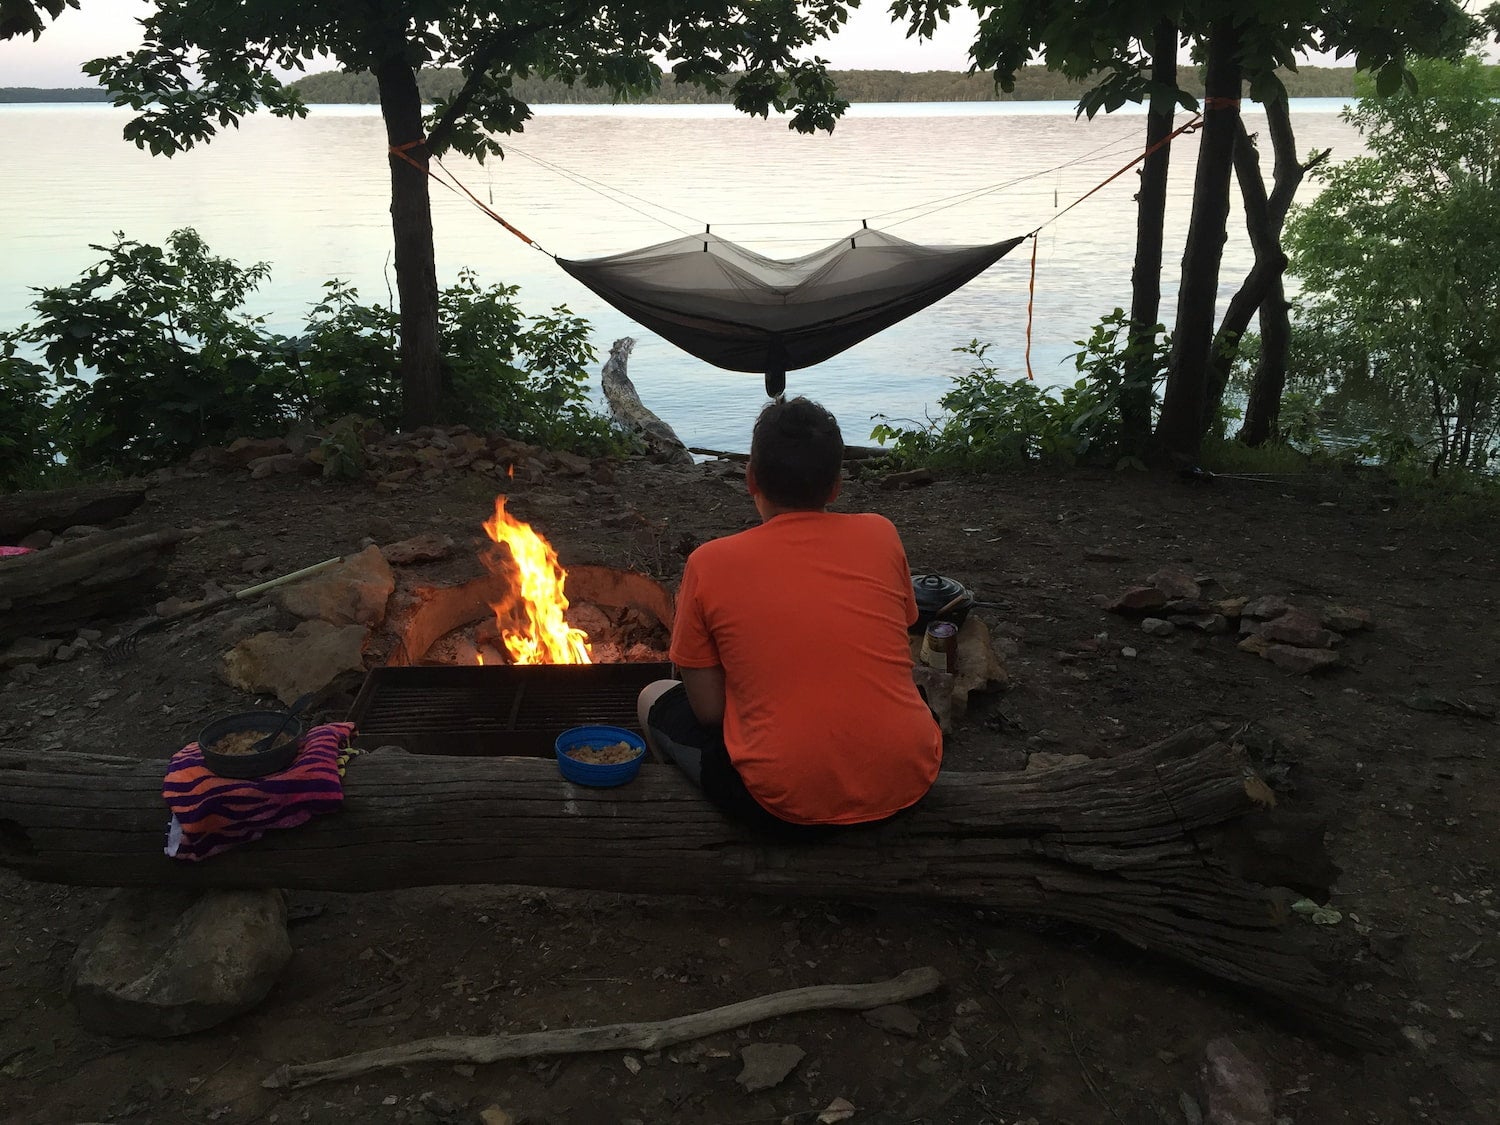 person sitting by fire with hammock and lake in background